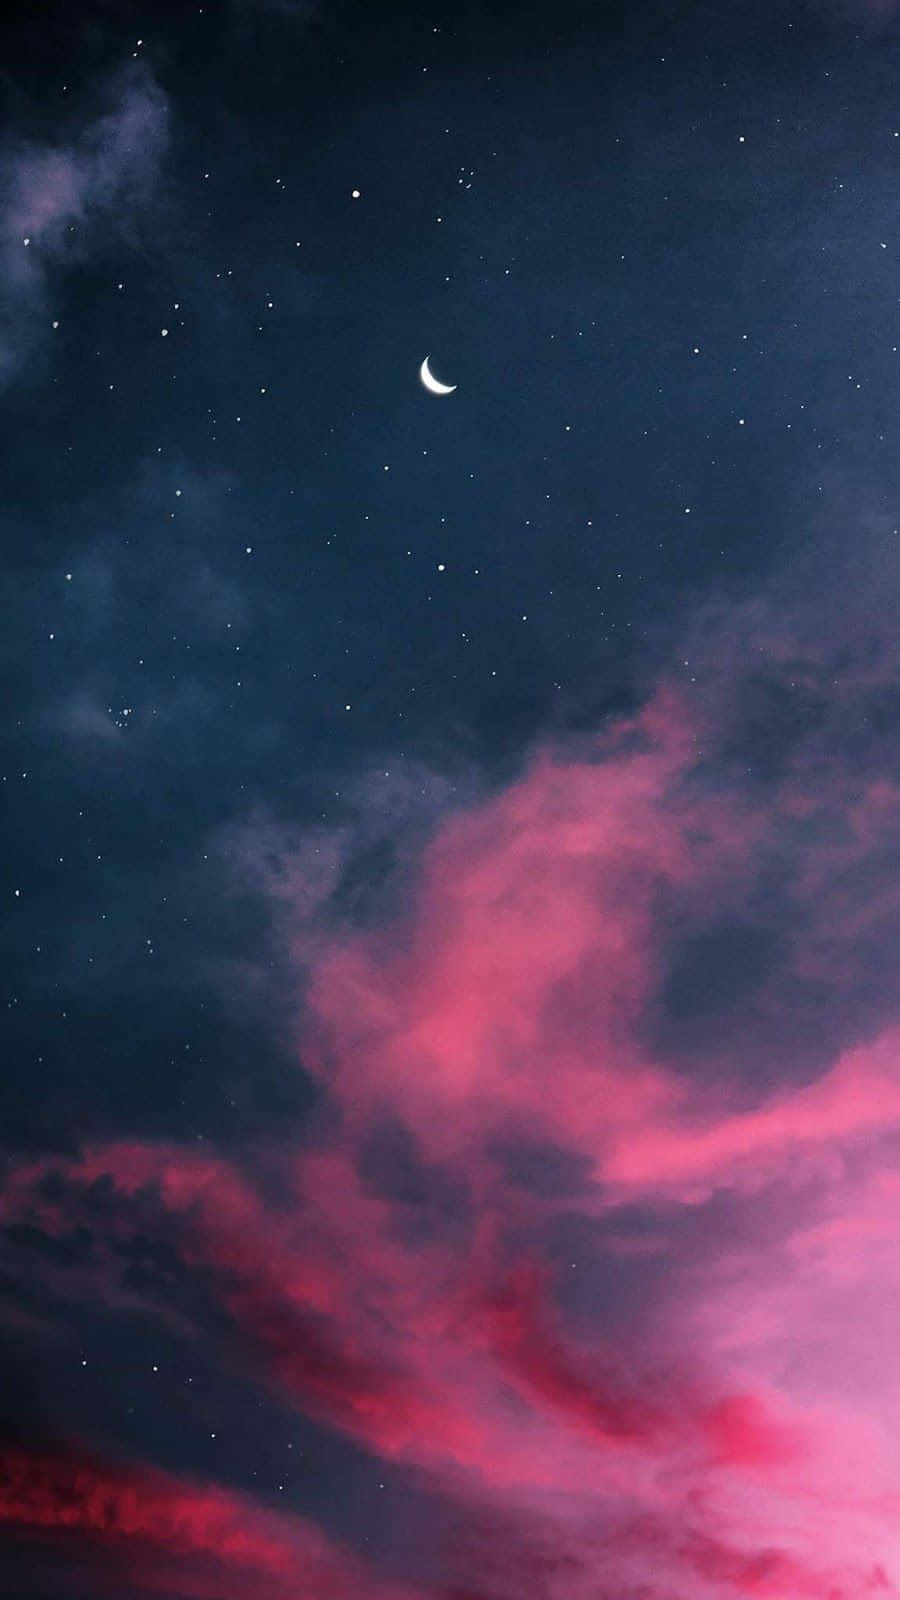 Look up! Aesthetic night sky with stars and clouds.